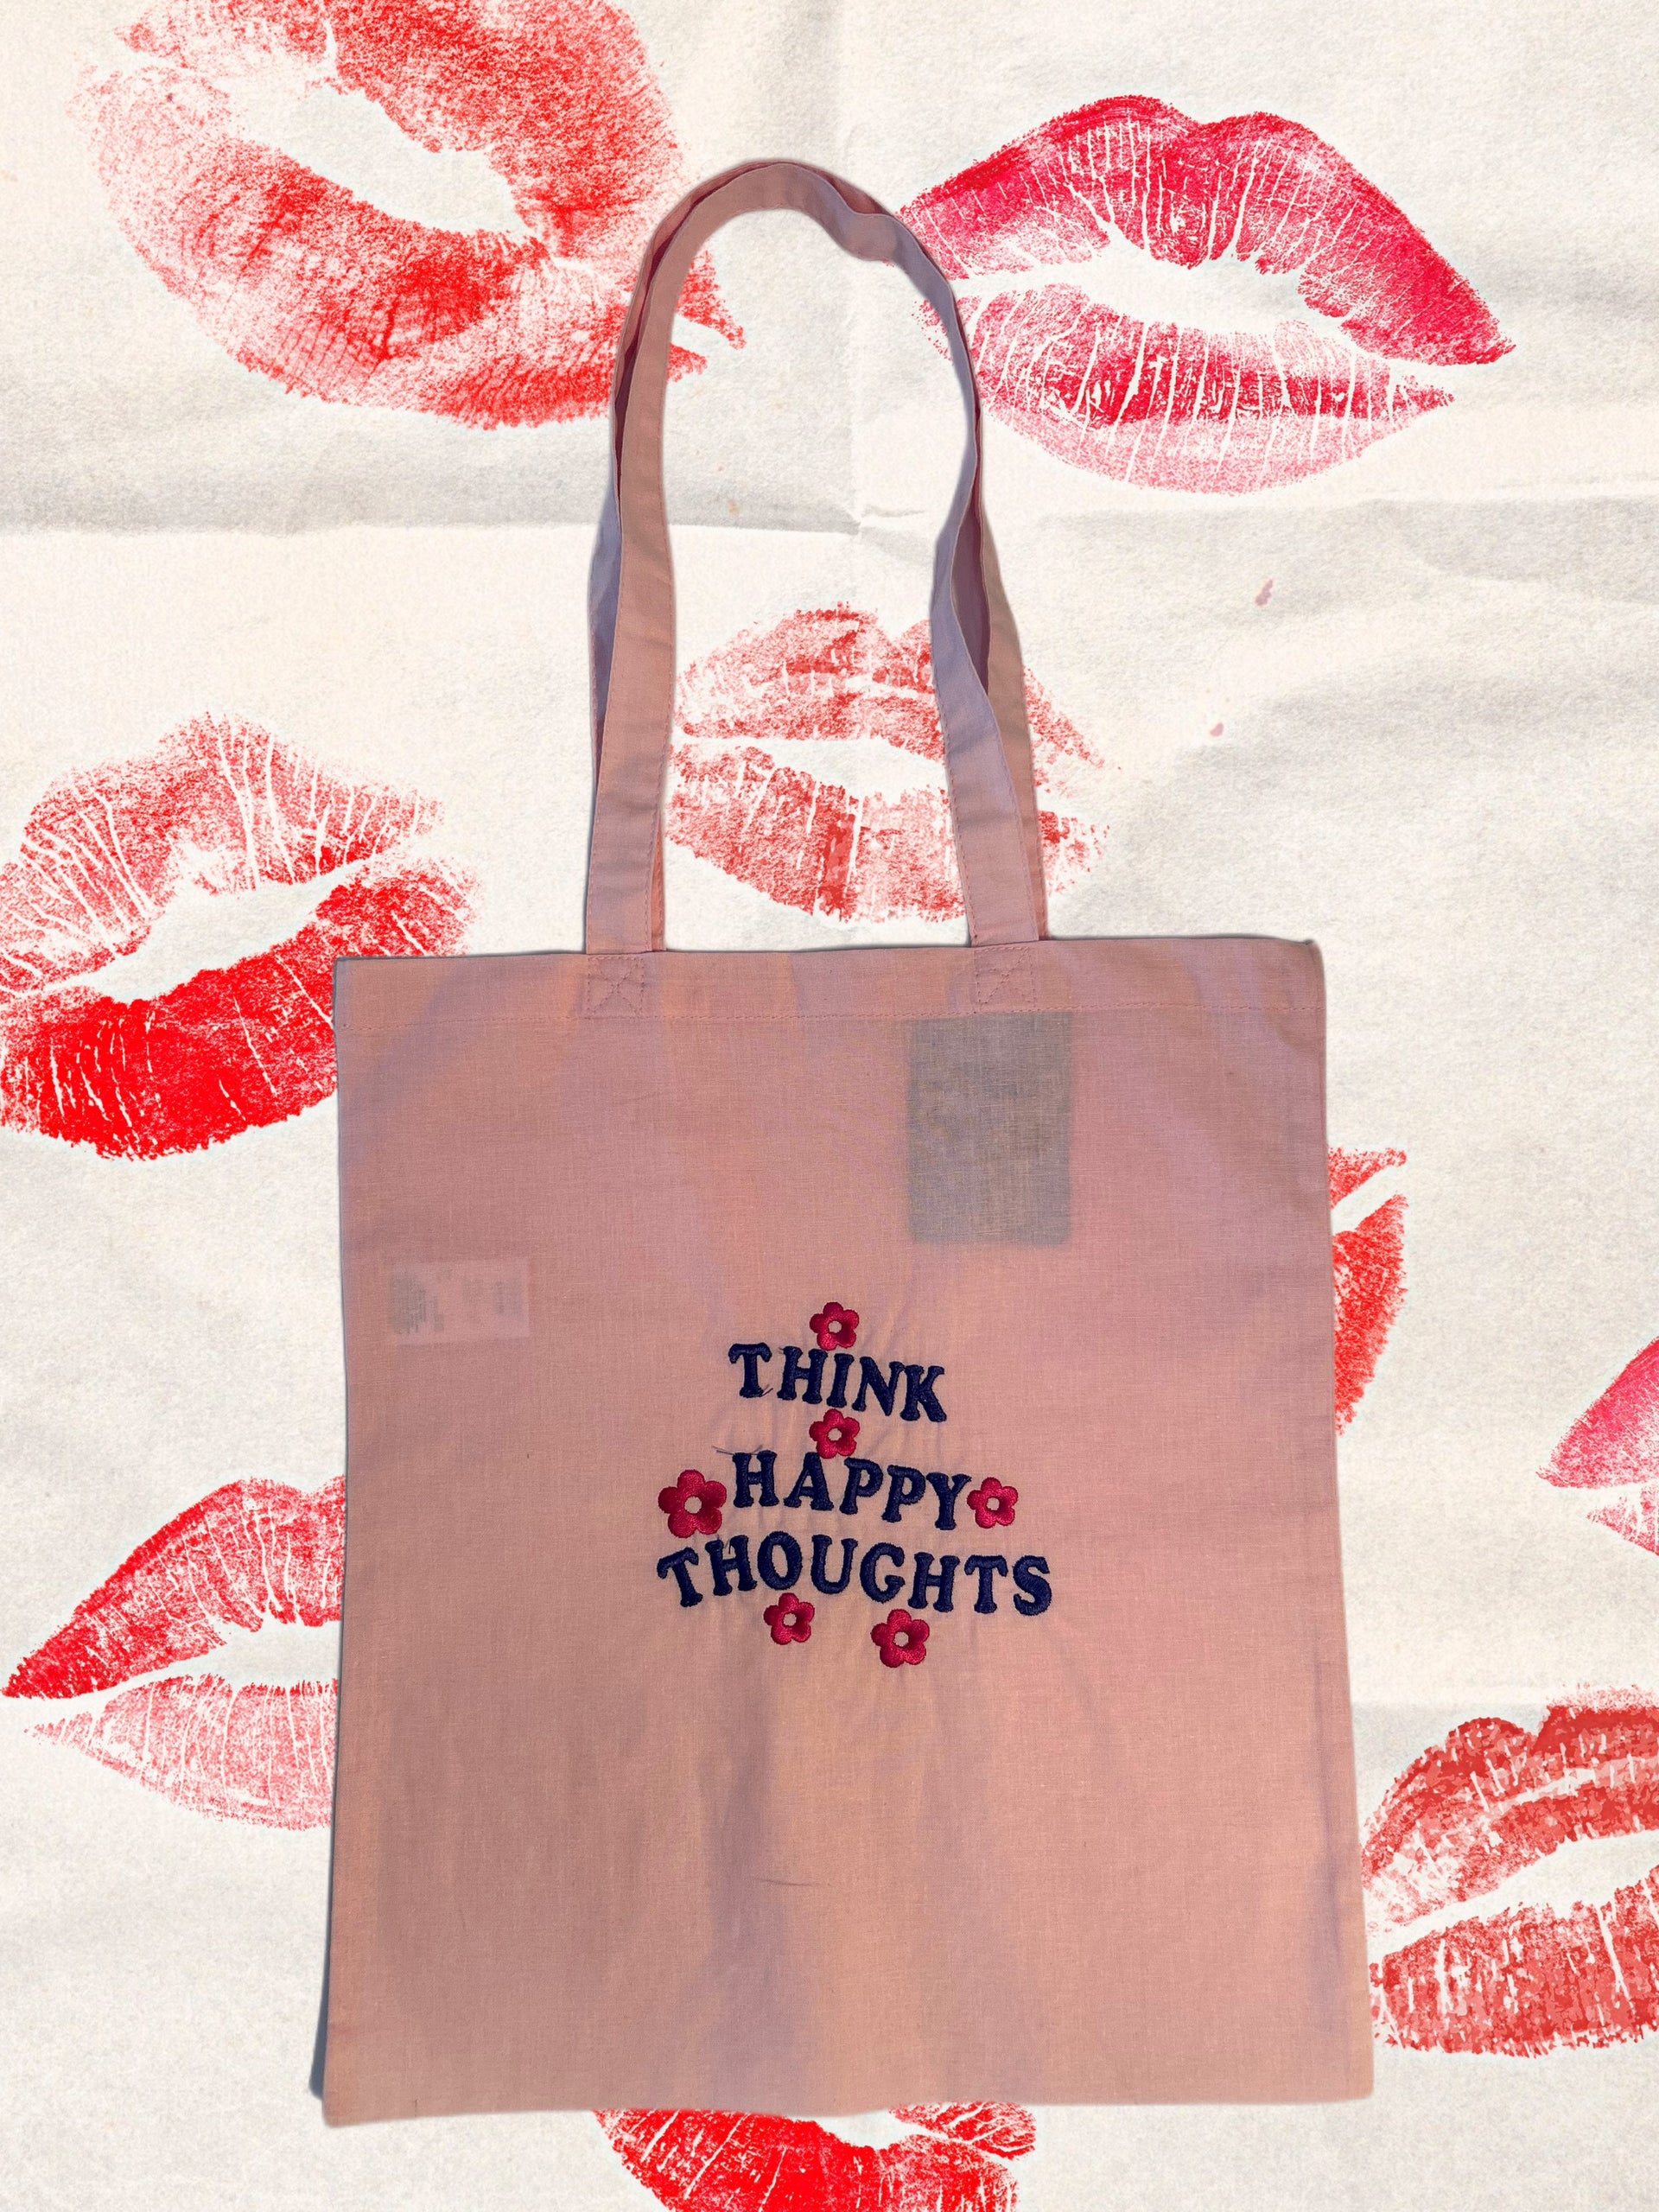 Custom nation tote-think happy thoughts(pink)